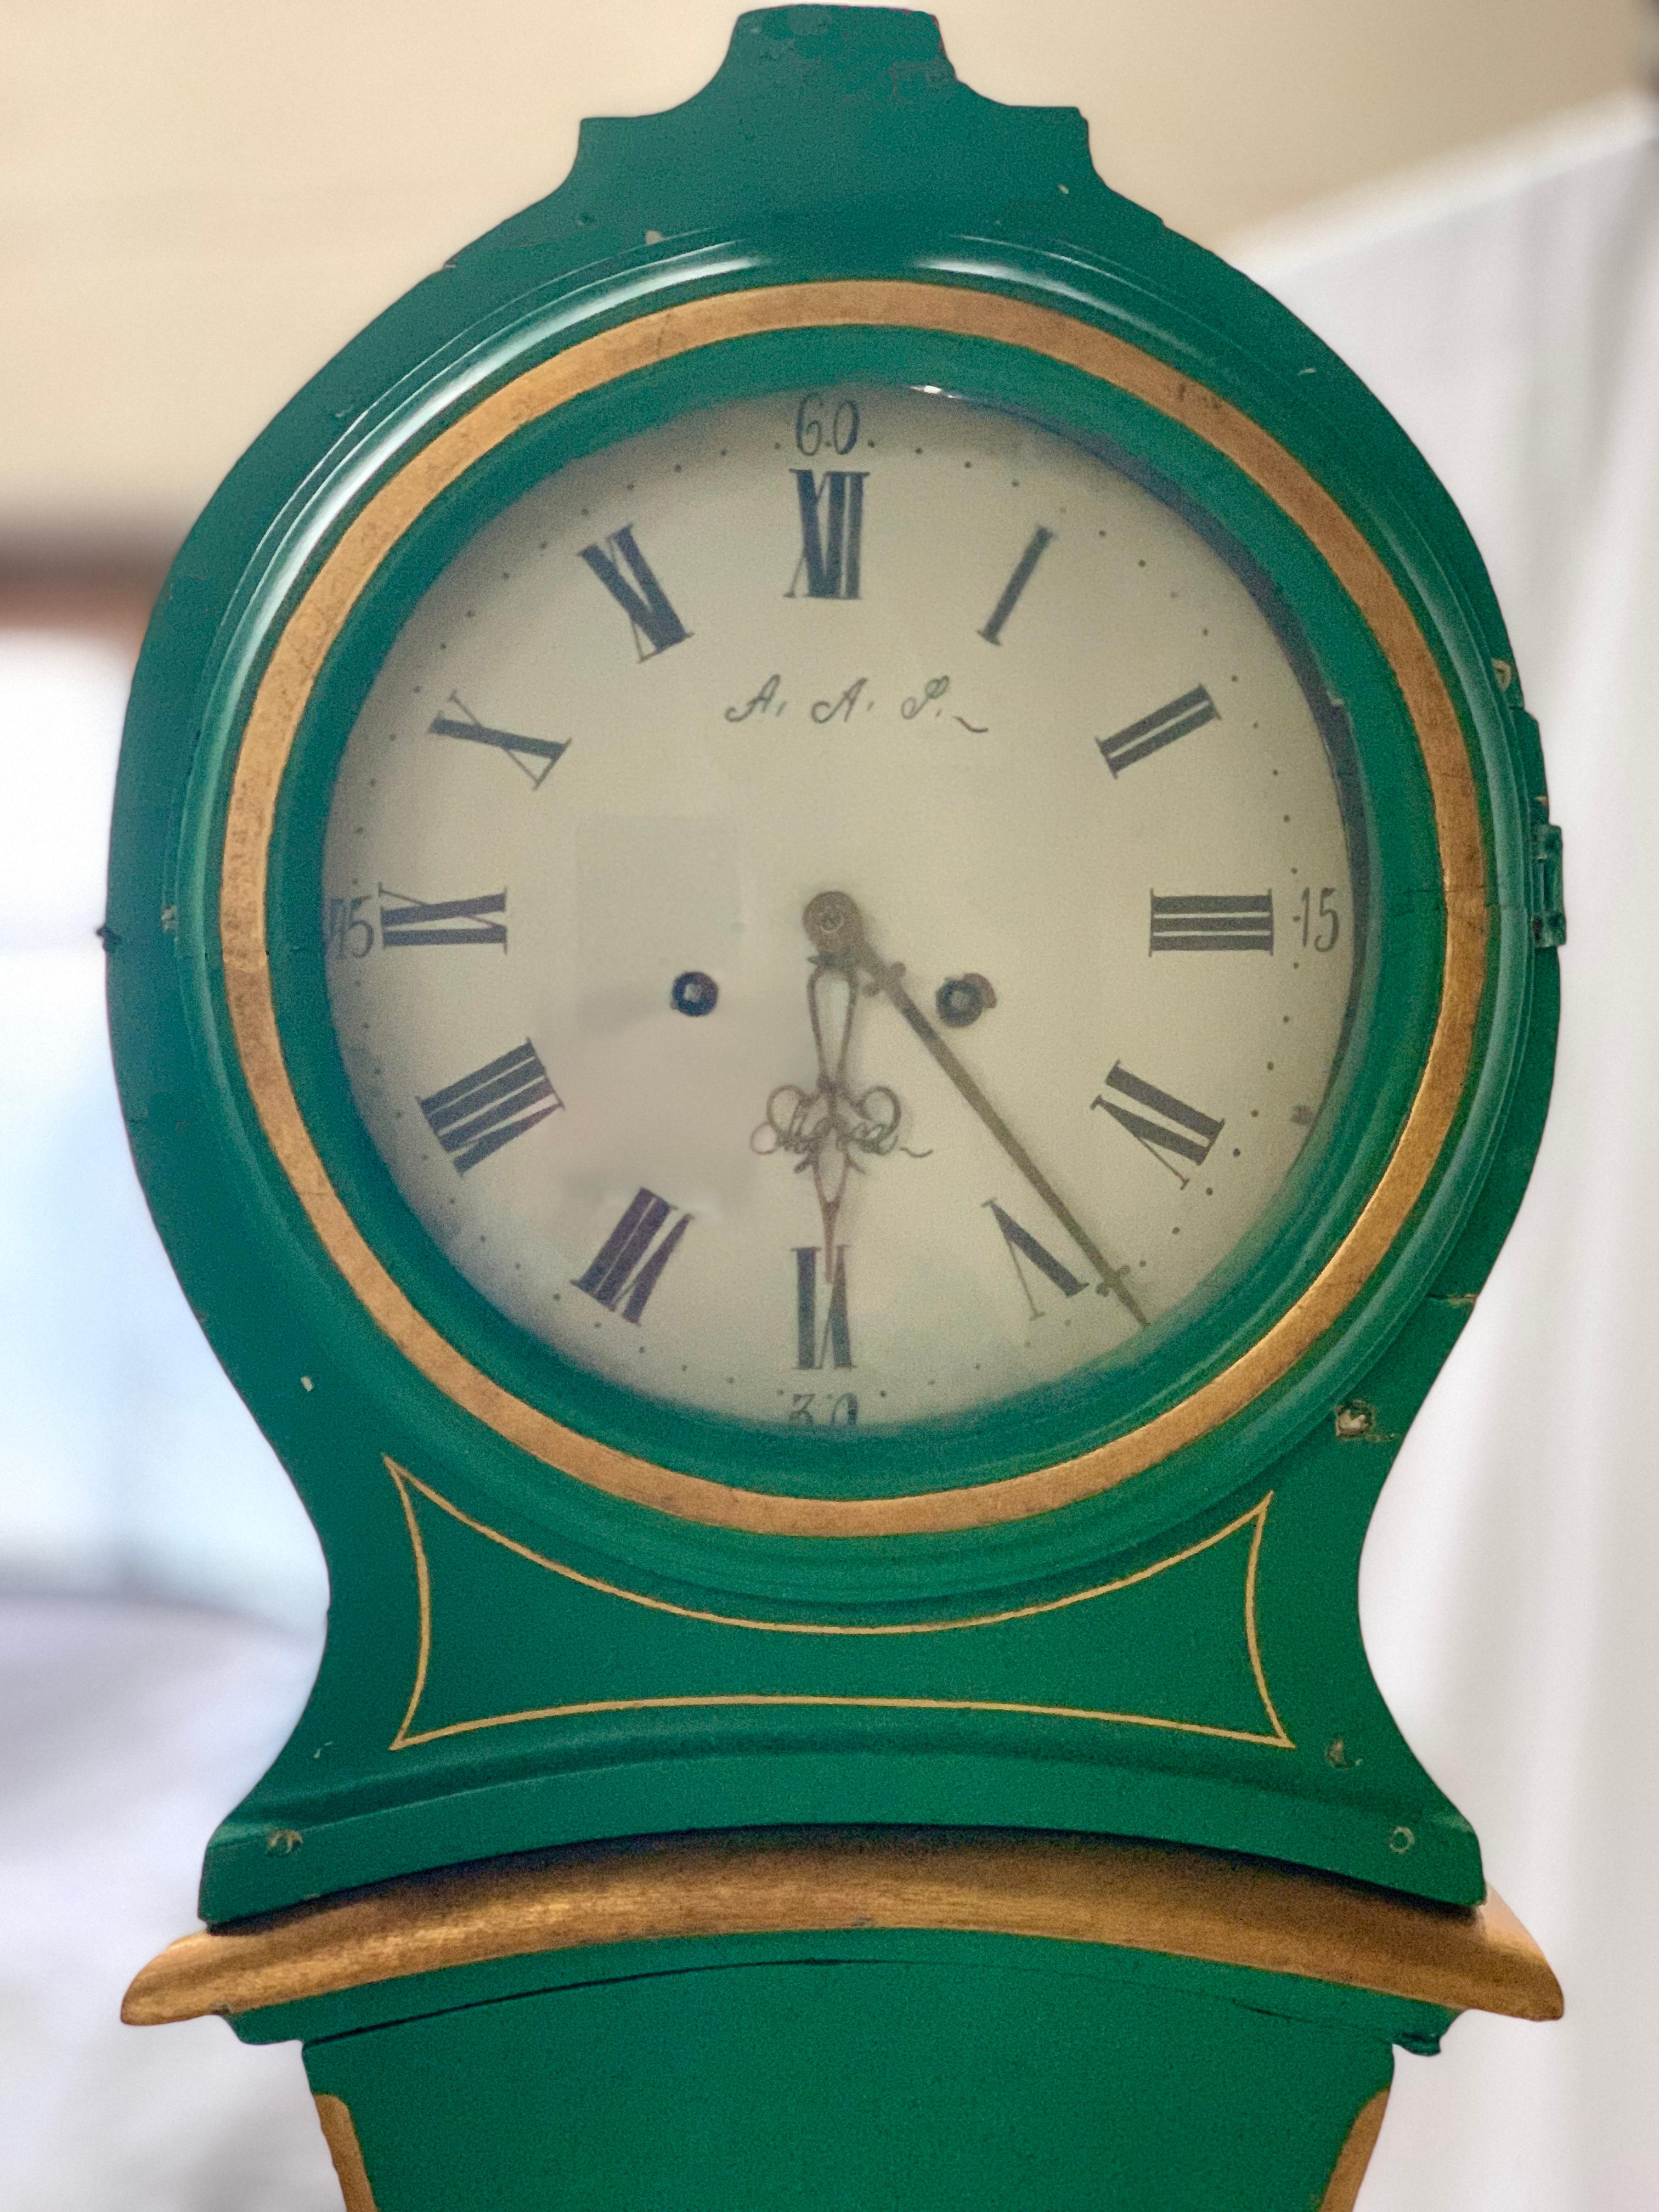 Swedish antique mora clock dating from early/mid-1800s featuring green paint with gold detail
painted on the body and it has a clean face.

It is structurally sound and will be checked over by our restorer prior to shipping.

the clock is sold 'as